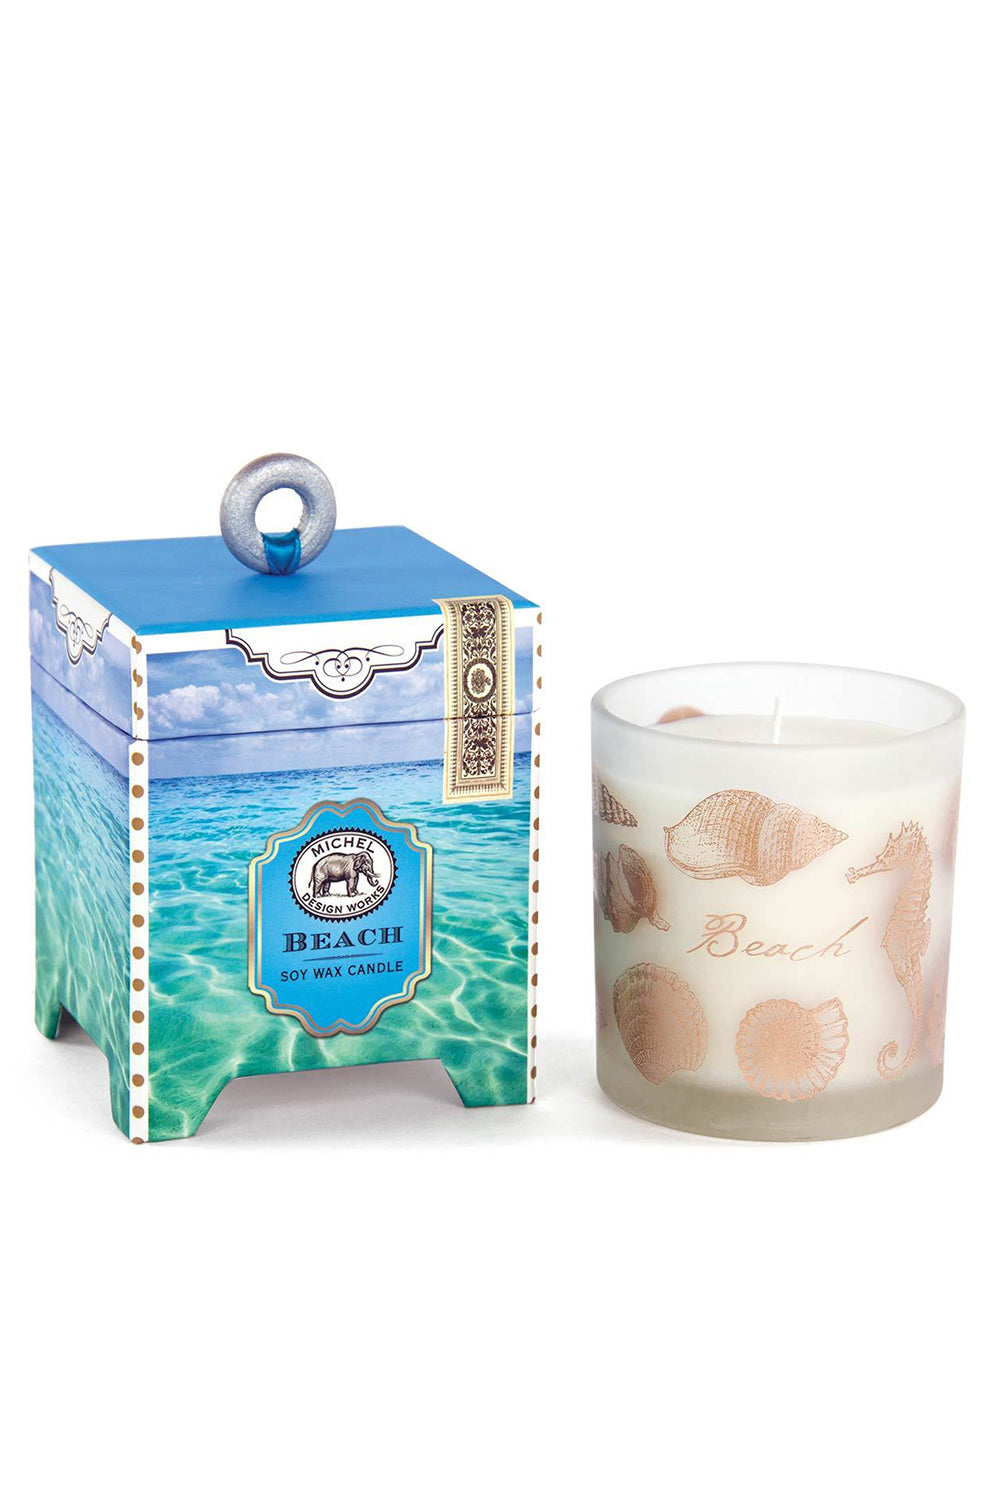 Michel Design Works Small Candle - Beach